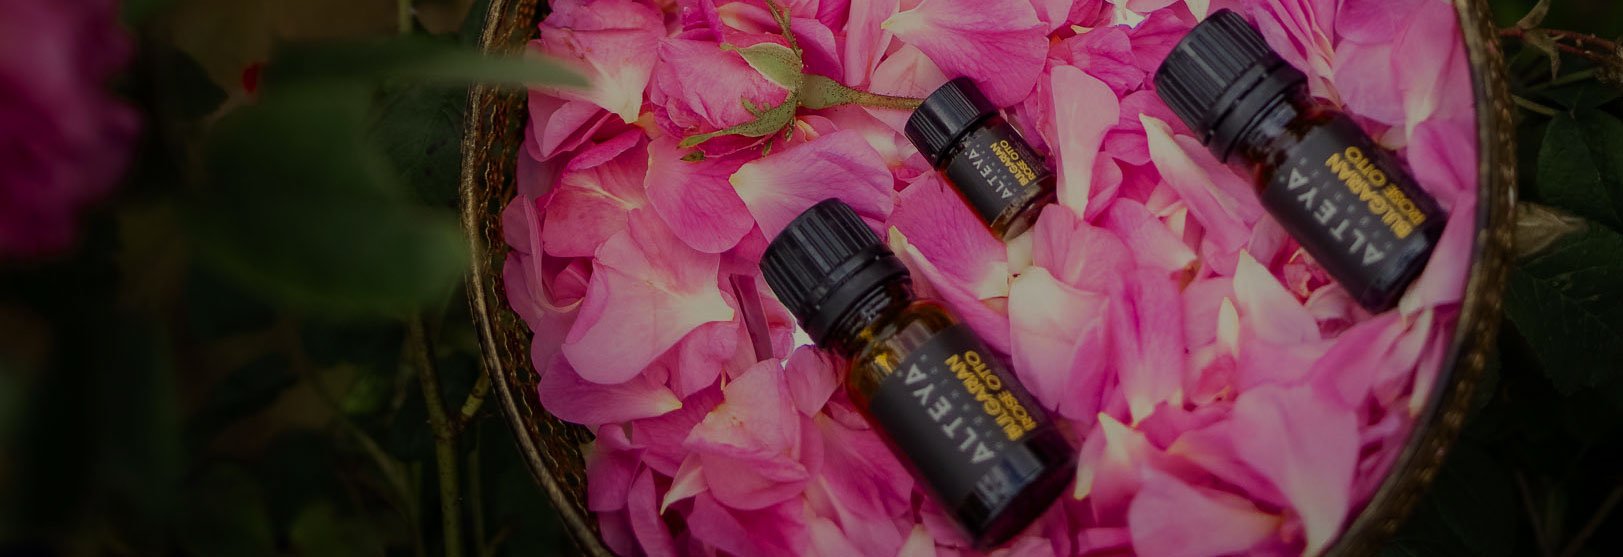 Essential oils on a plate with pink petals.